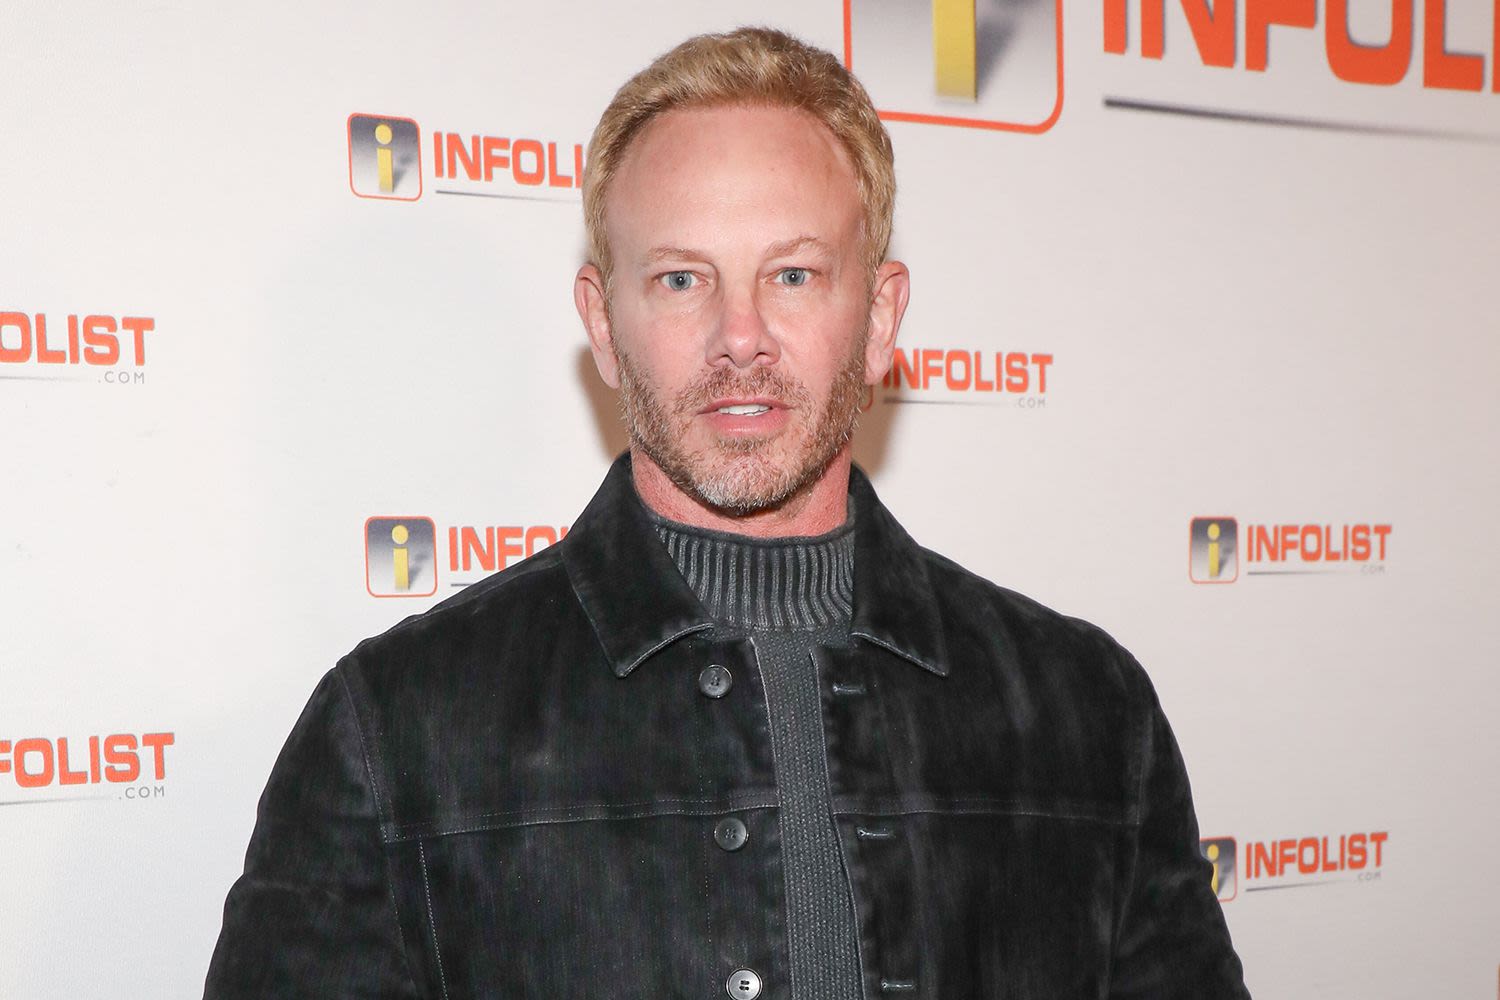 2 Bike Gang Members Arrested Over Ian Ziering's New Year's Eve Attack, Say Police